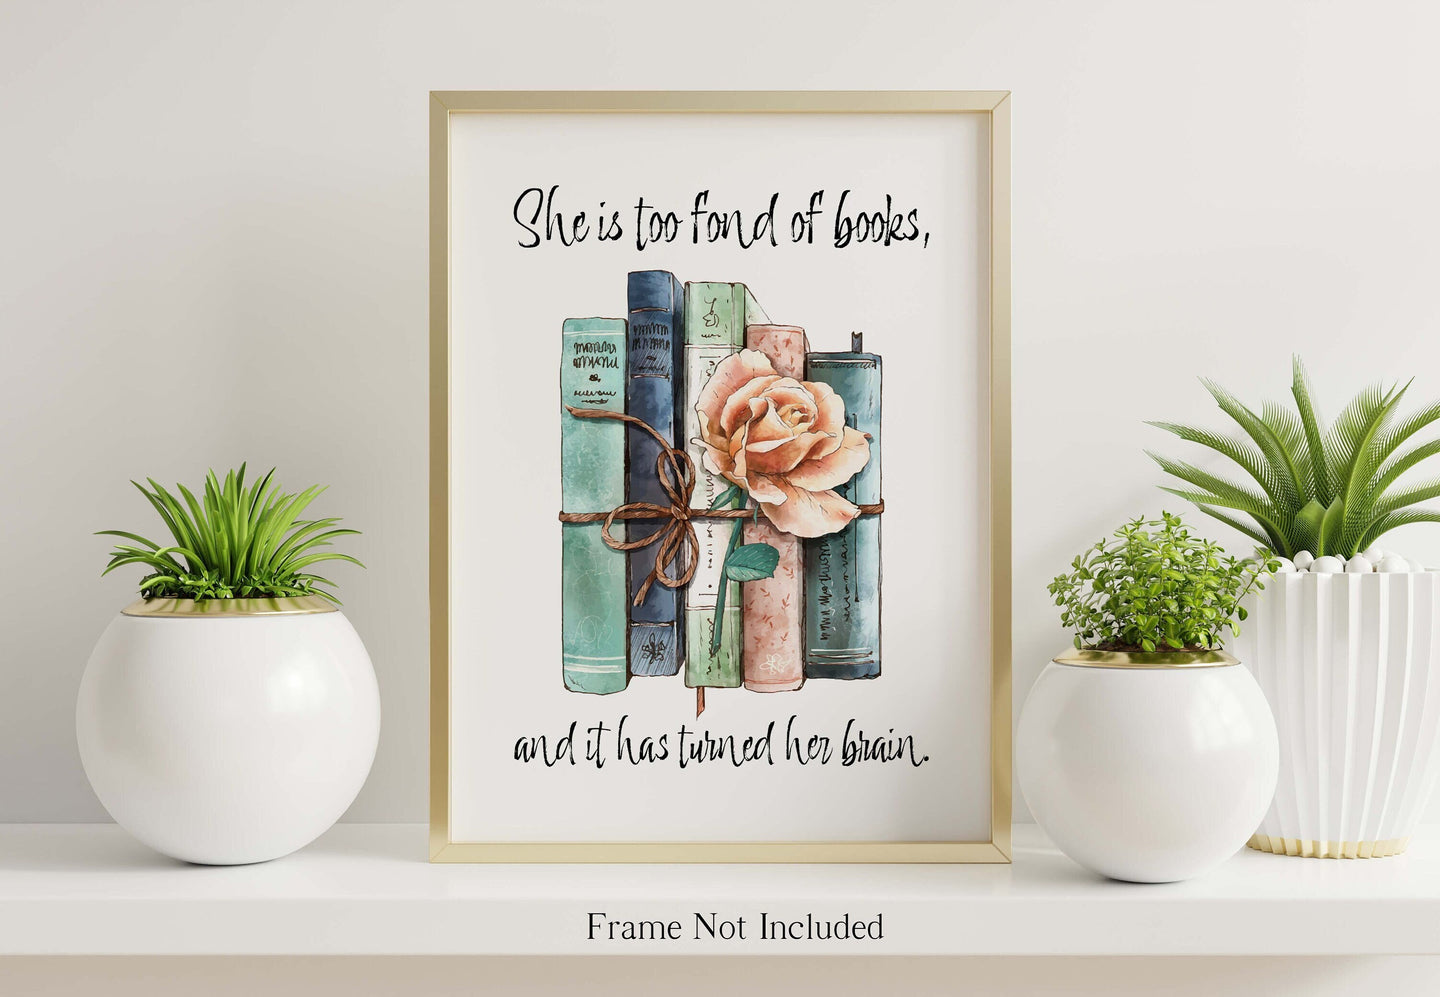 Louisa May Alcott Quote About Reading - She is too fond of books, and it has turned her brain - Physical Art Print Without Frame